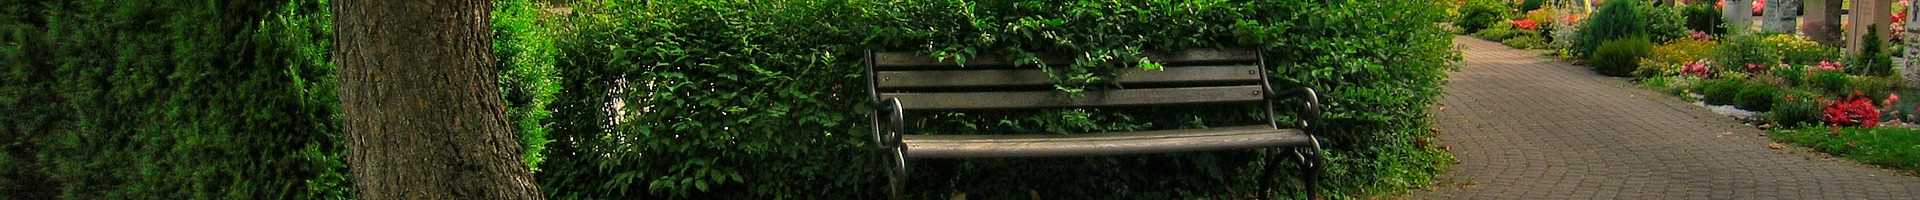 Bench at a cemetery